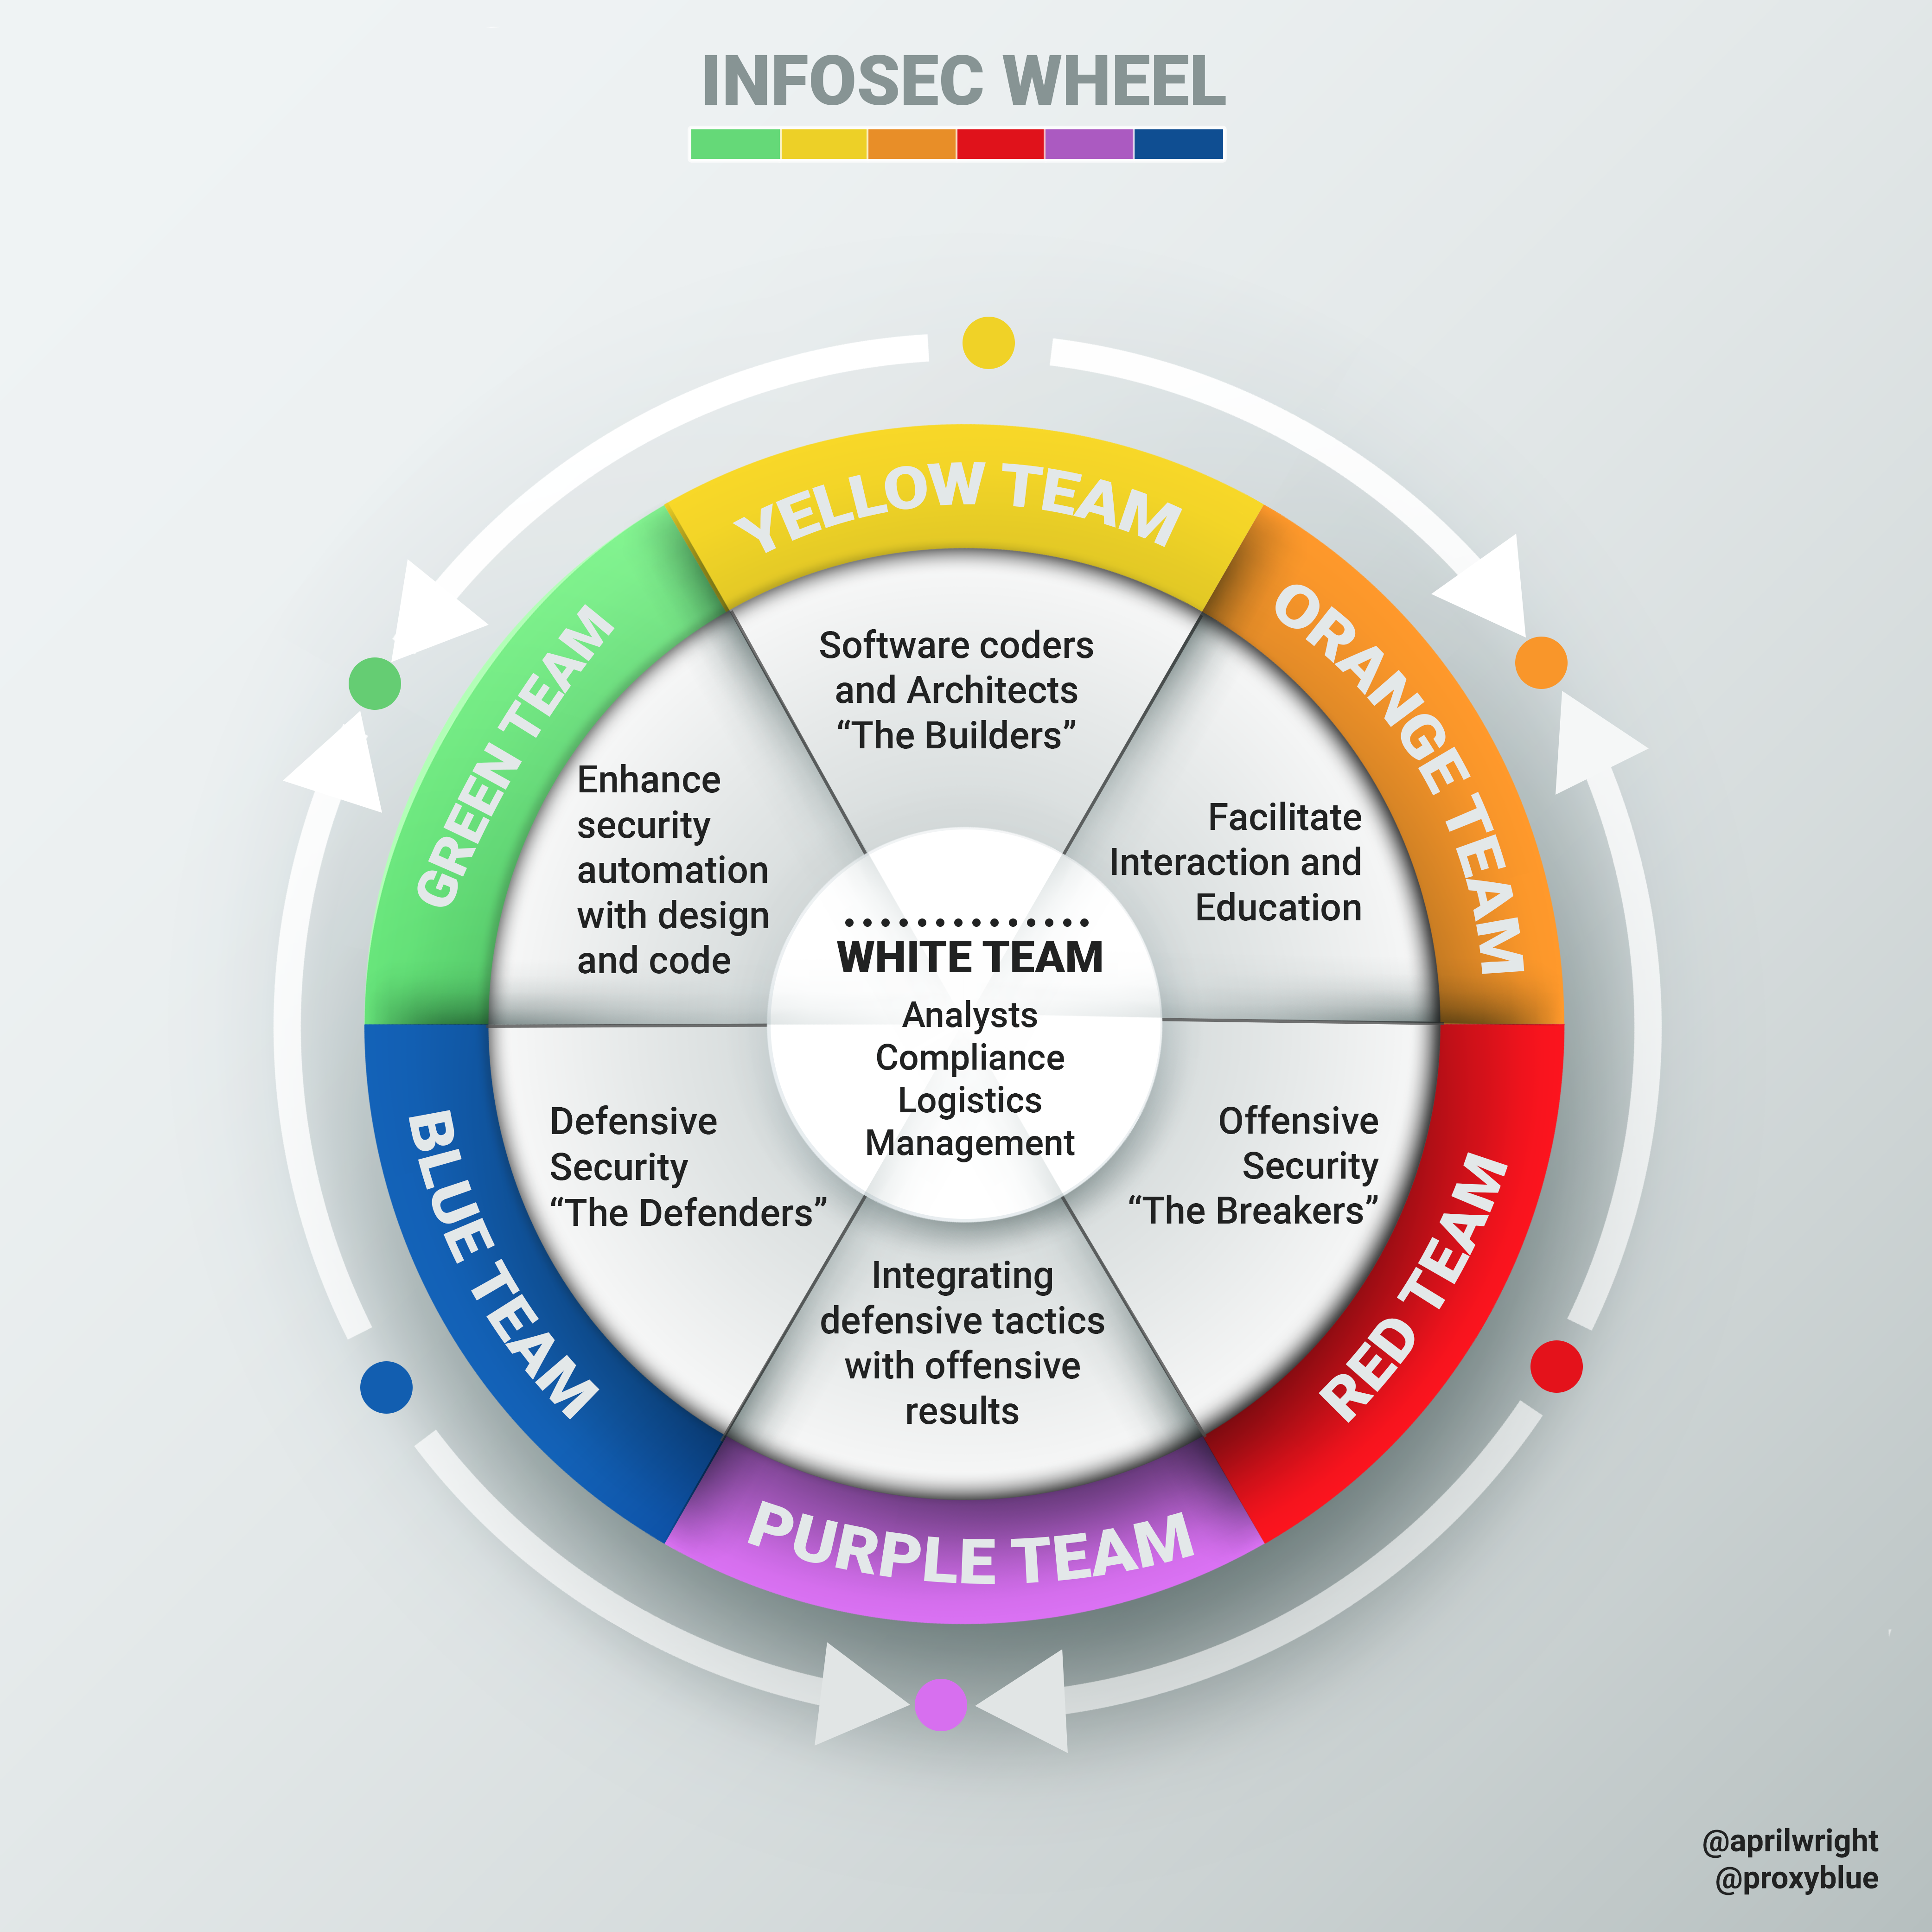 The Information Security Color Wheel